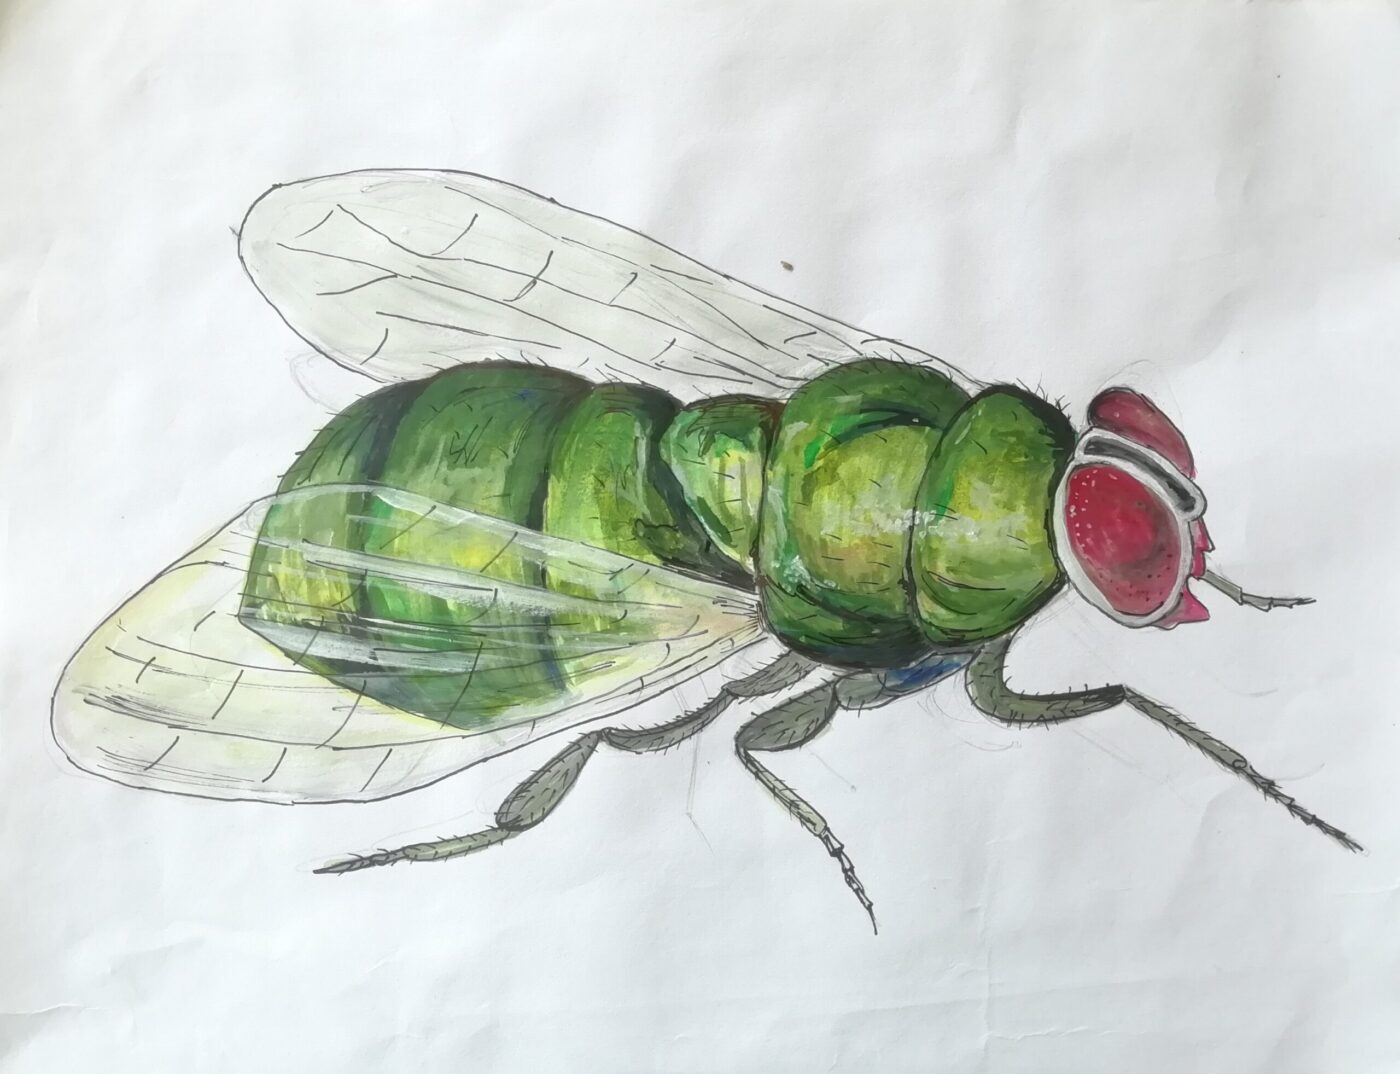 Moving insect most commonly found in India by Vedang Naik, Highly Commended in 13-18 category, Insect Week 2022 art competition